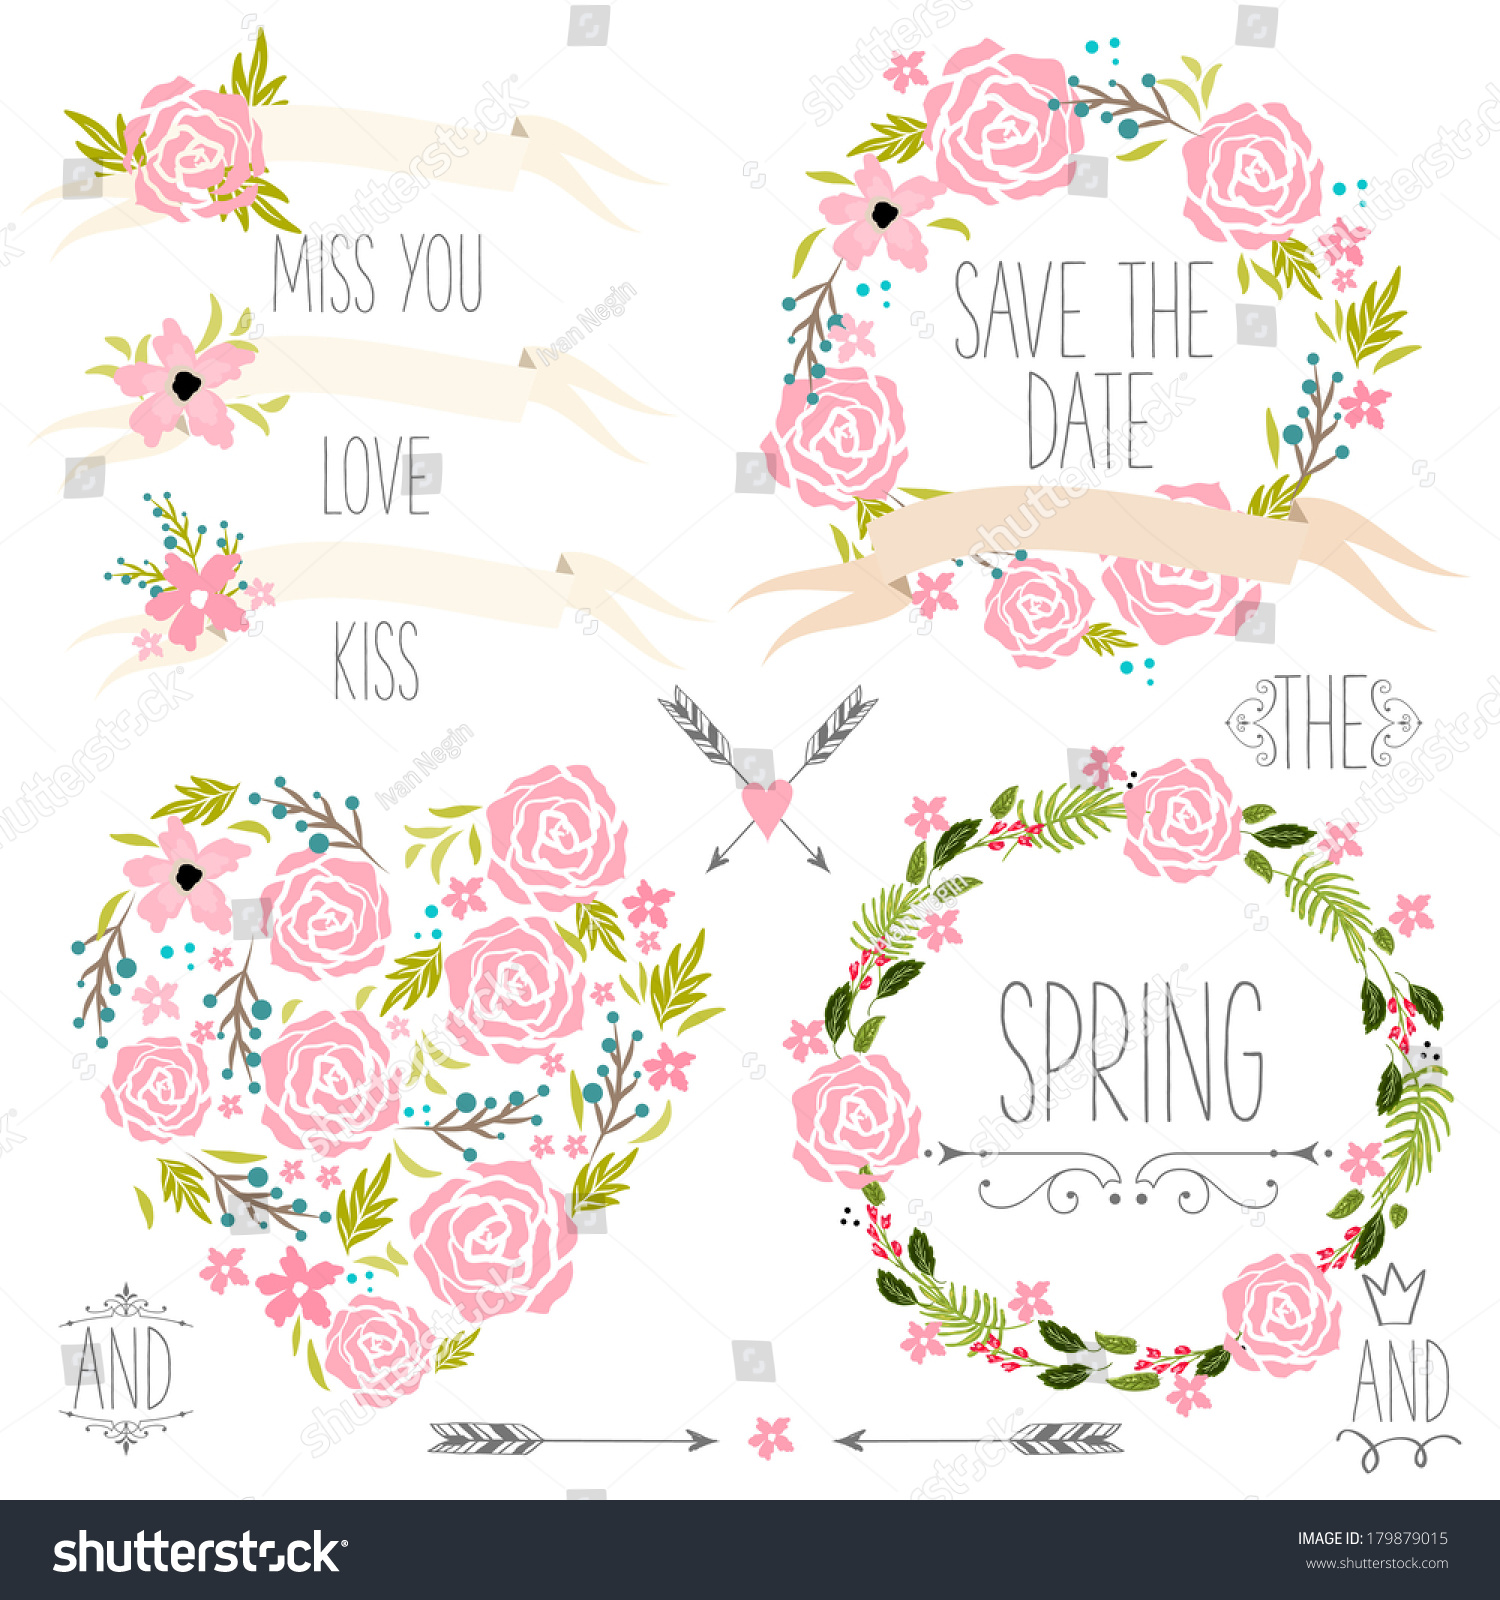 floral wedding clipart free download - photo #35